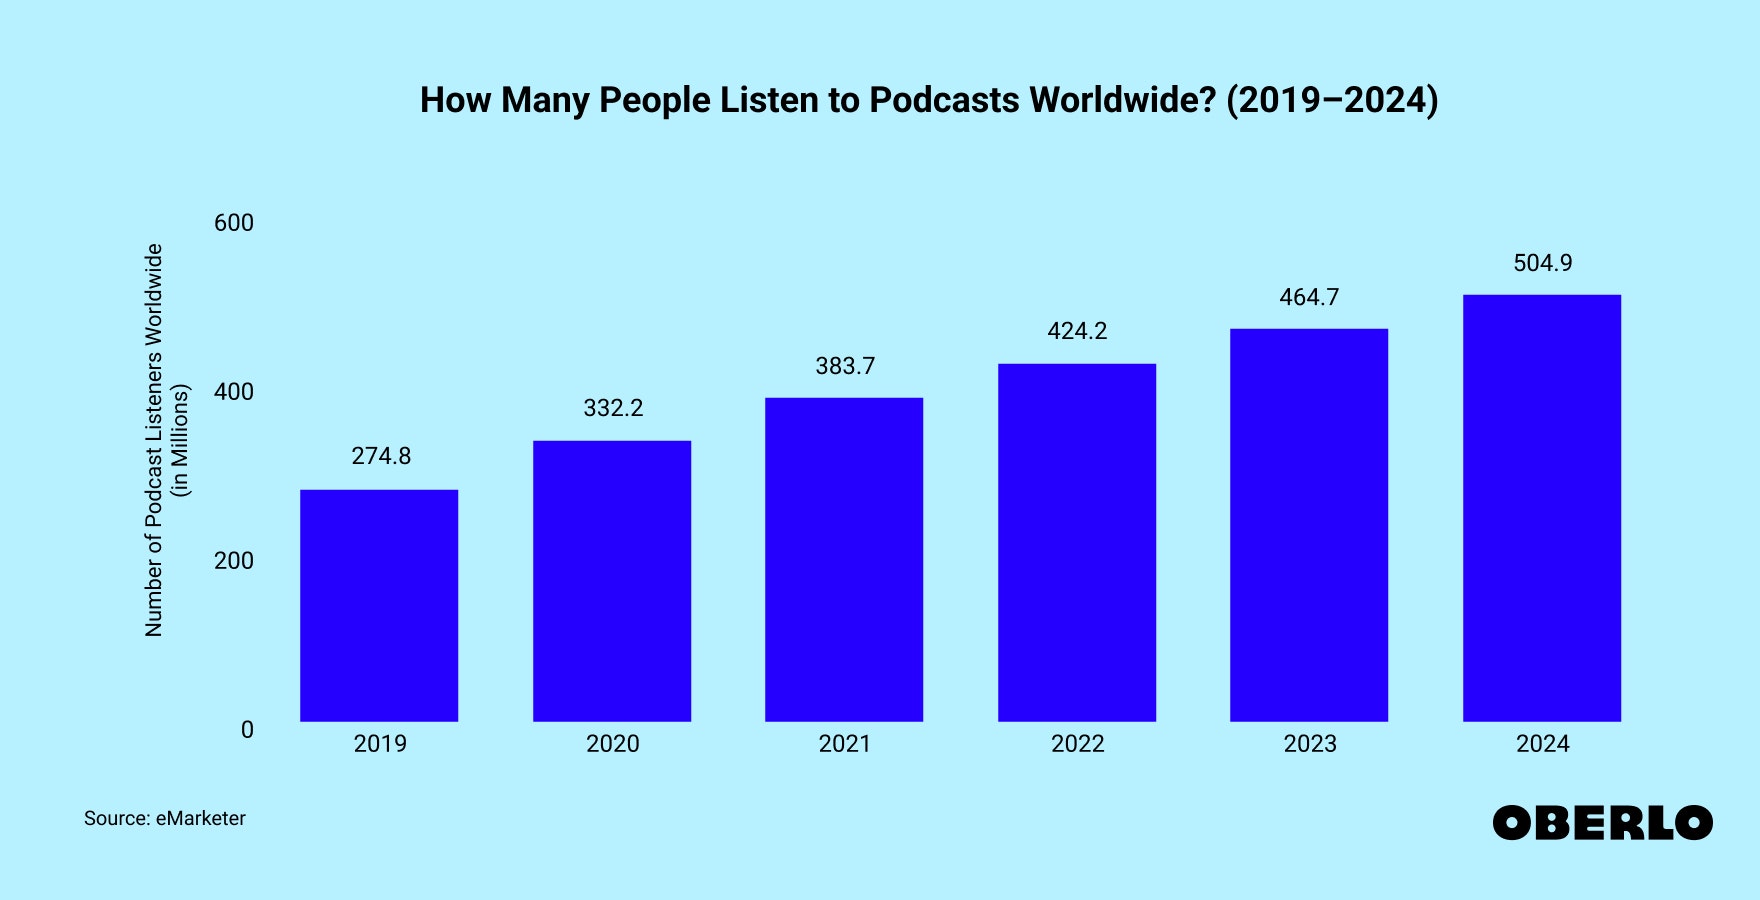 Chart showing the number of podcast listeners worldwide from 2019 to 2024